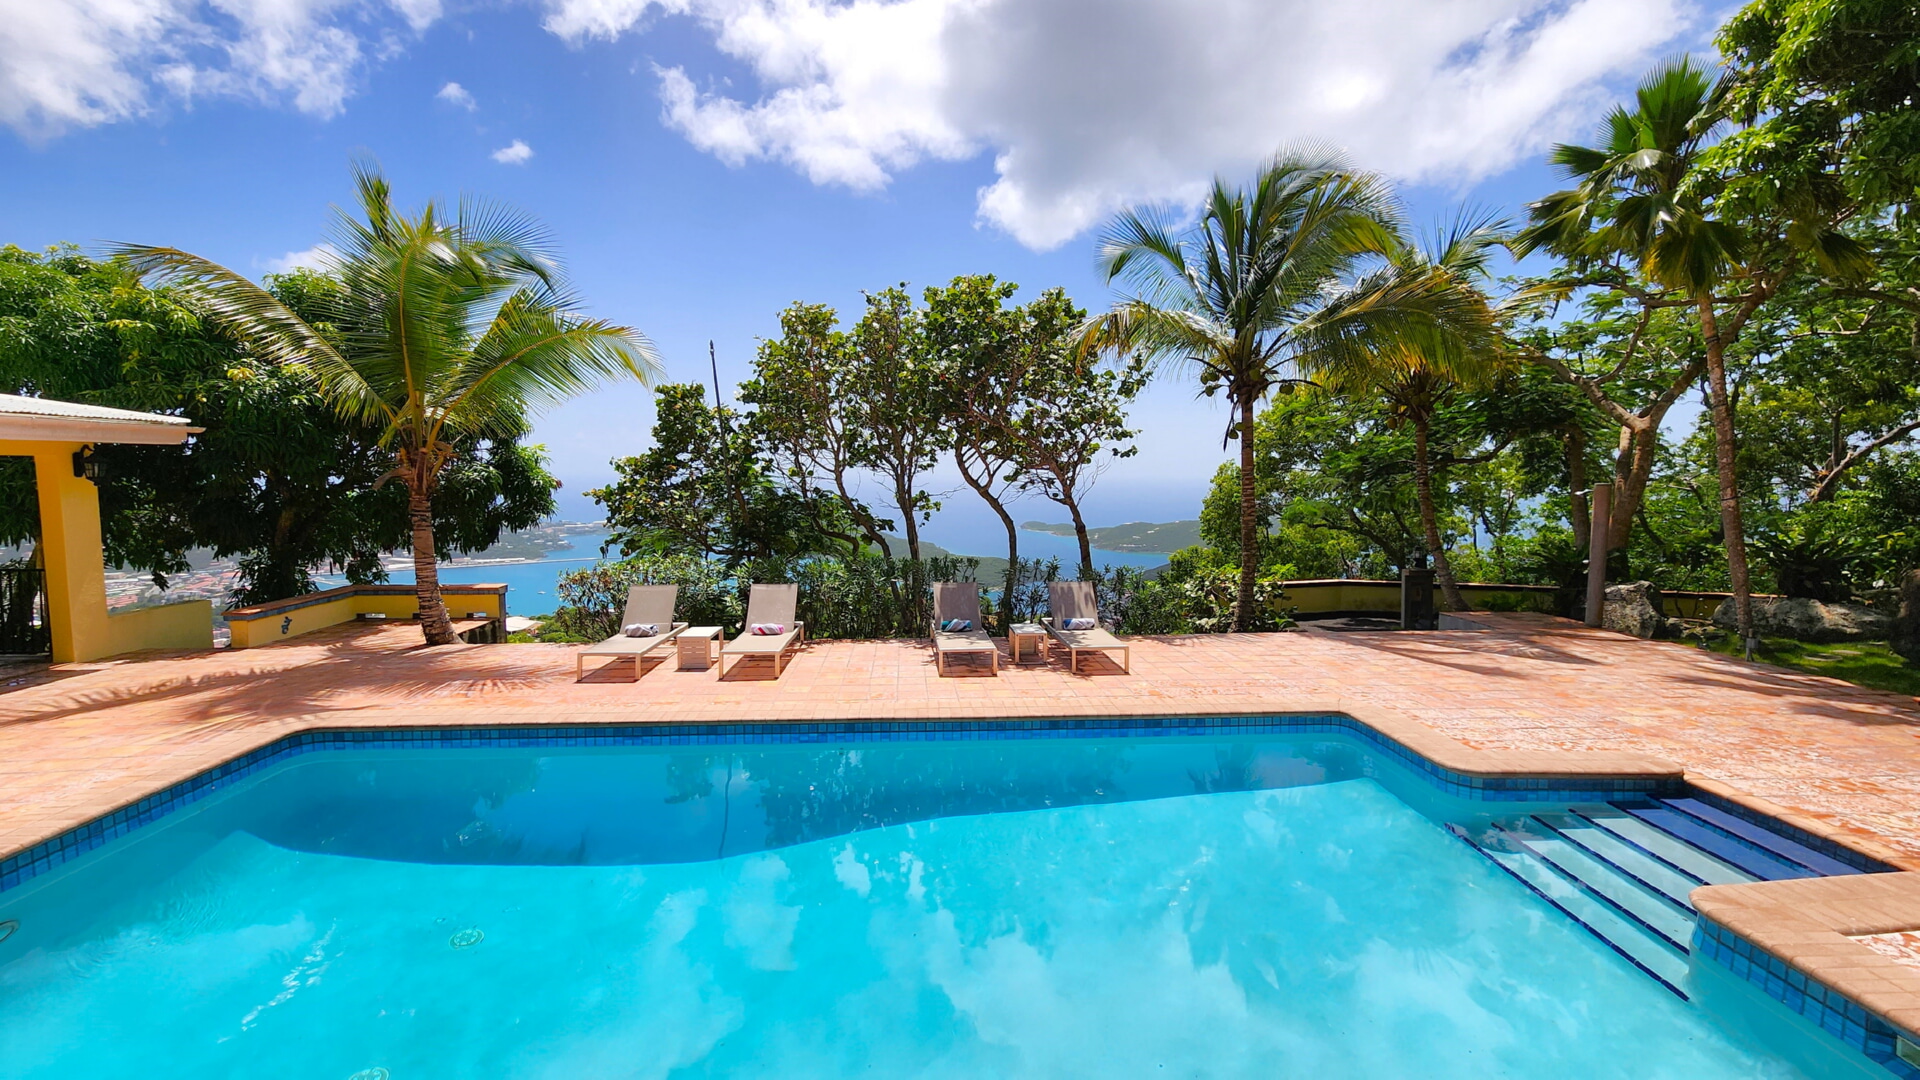 2 Bedroom 2 Bathroom Home with Large Pool and Amazing Views of the Caribbean Sea at Coconut Cottage